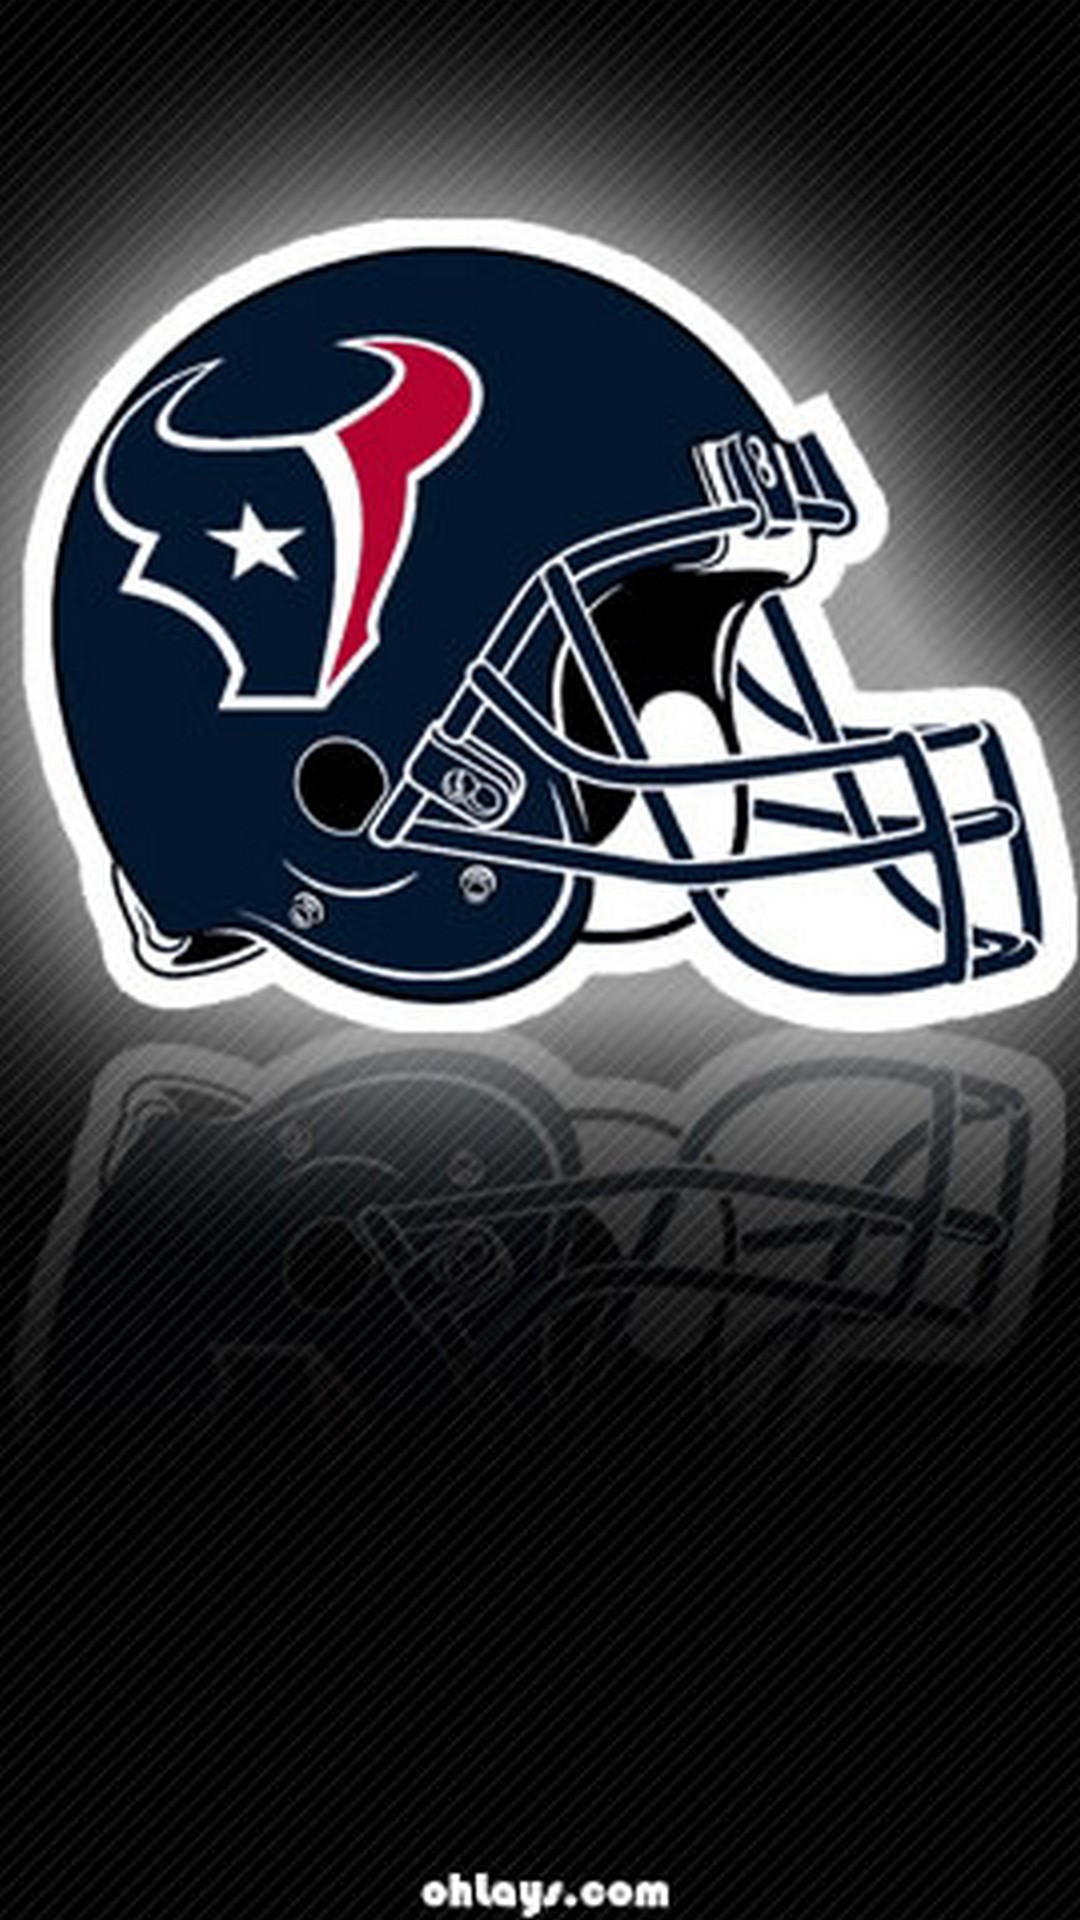 Houston Texans iPhone Wallpaper Tumblr With high-resolution 1080X1920 pixel. Download and set as wallpaper for Apple iPhone X, XS Max, XR, 8, 7, 6, SE, iPad, Android